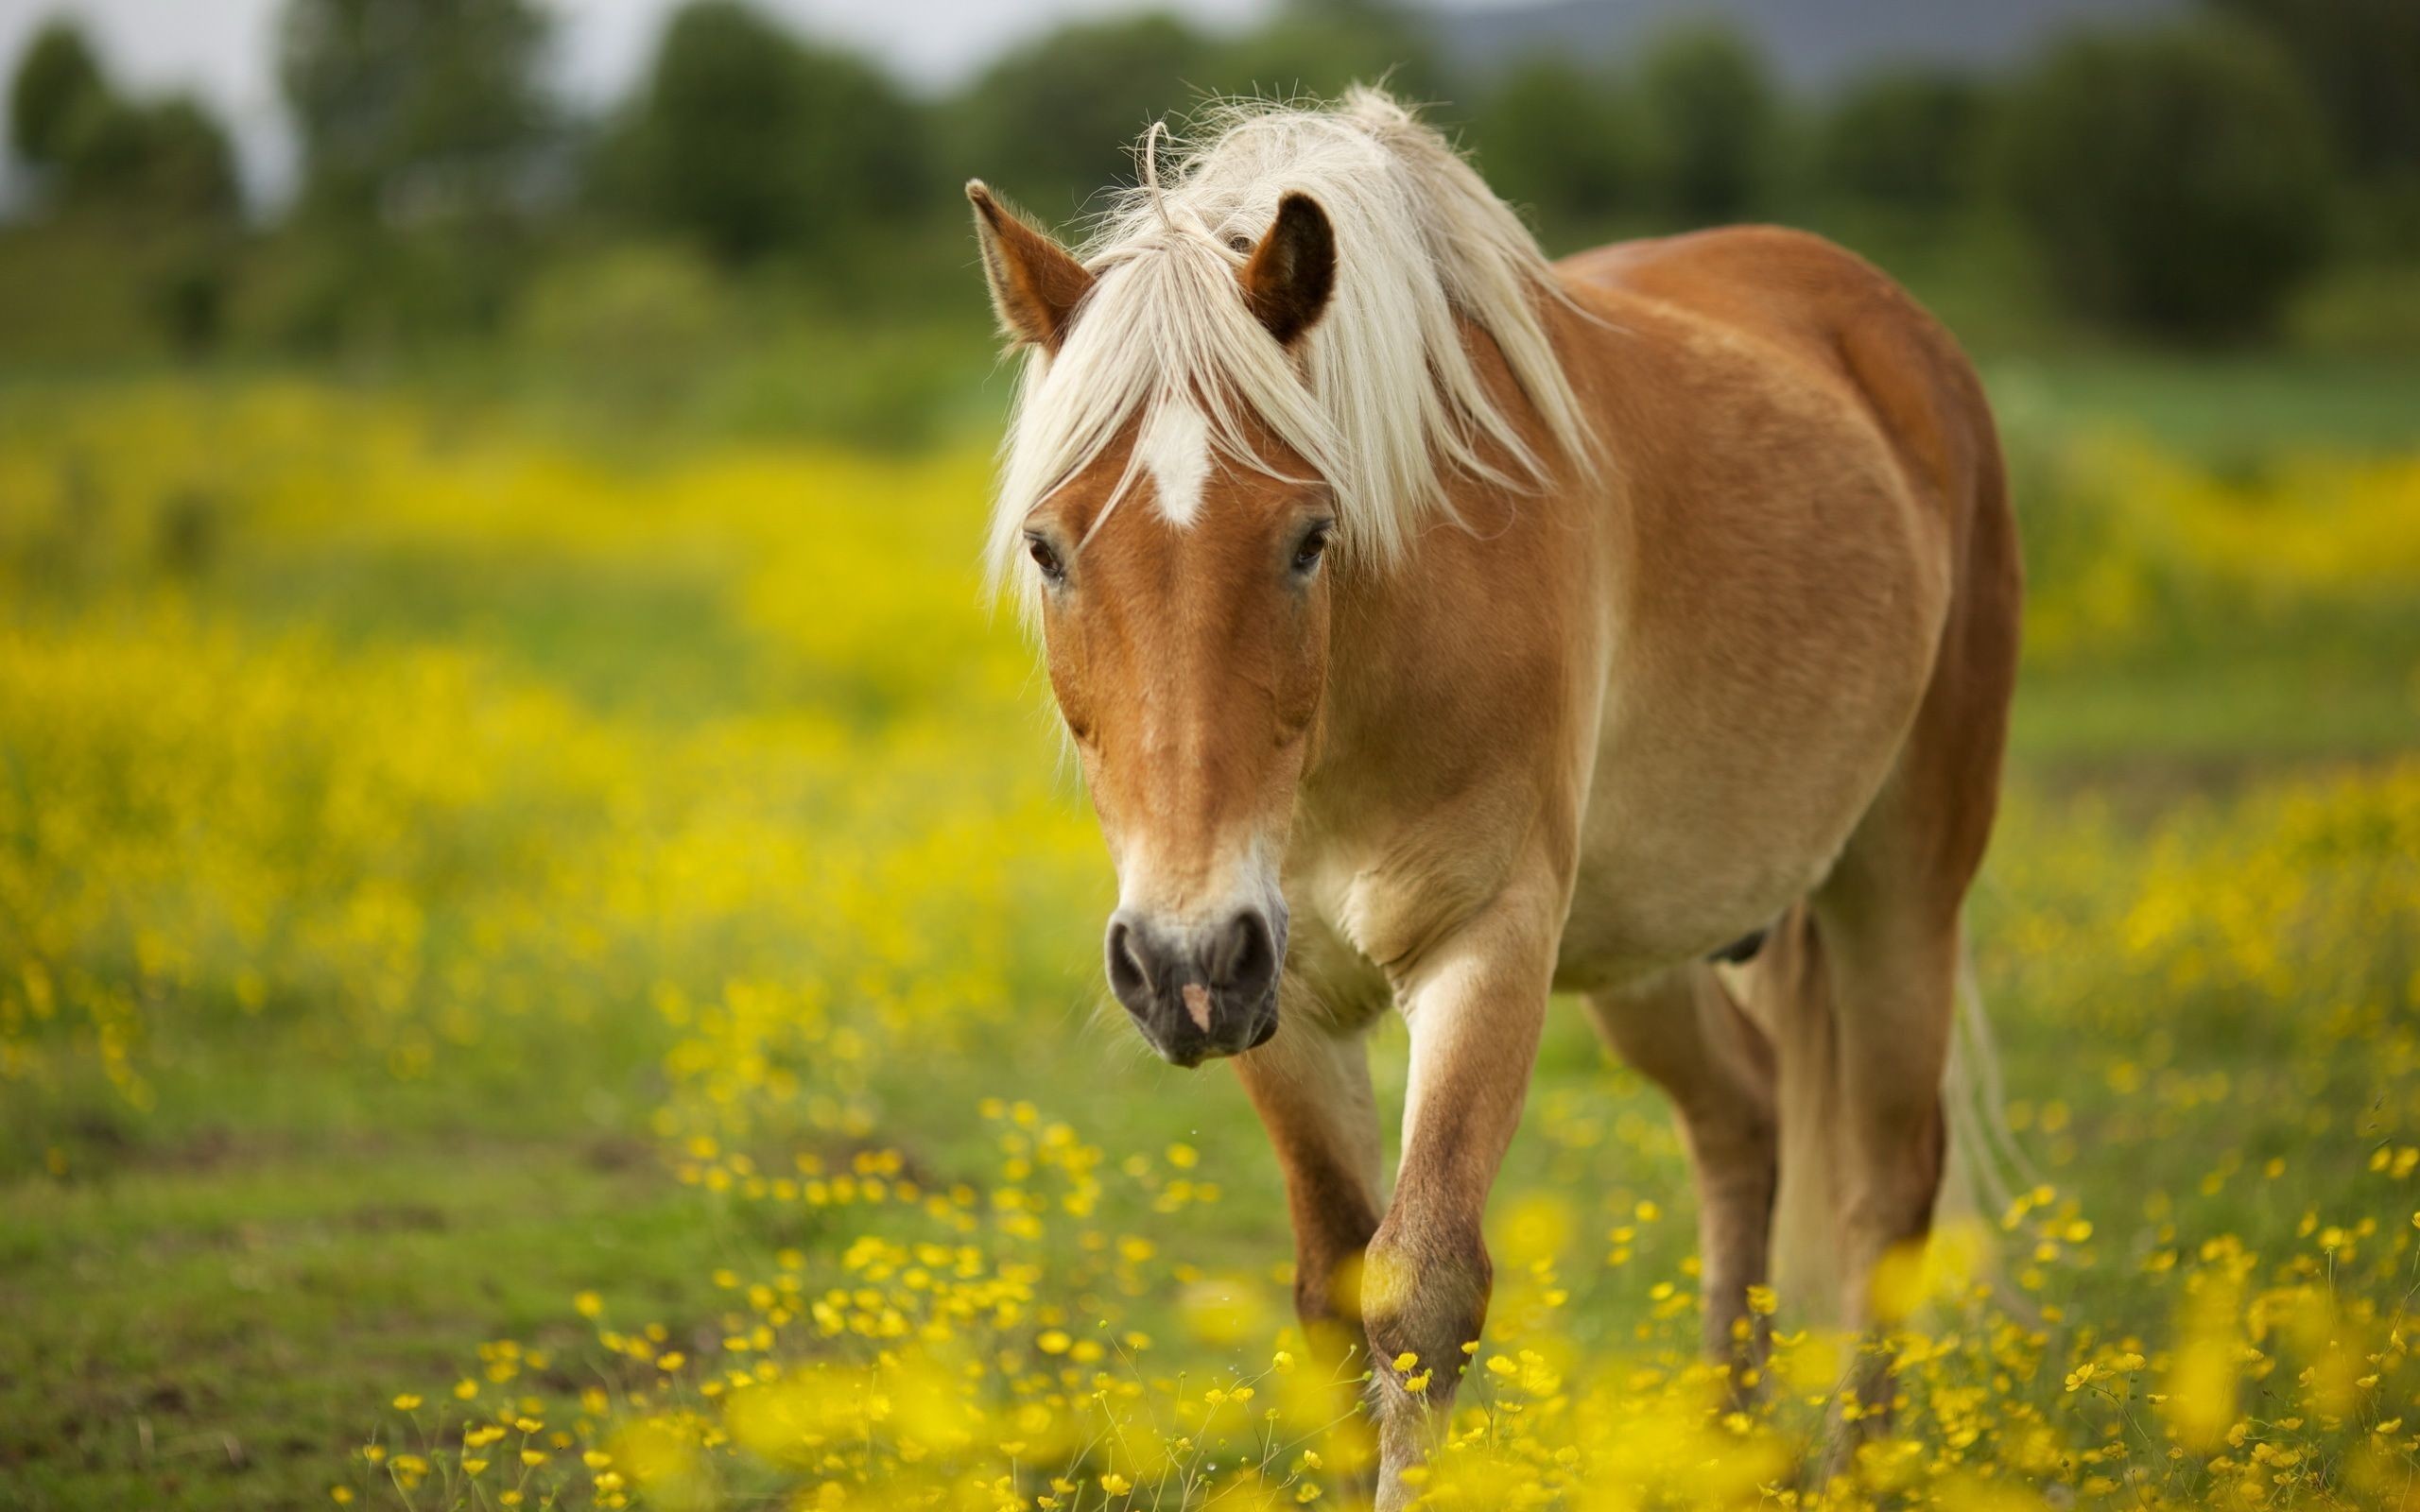 2560x1600 1920x1200 Free horse wallpapers full hd - Get HD Wallpapers Free">